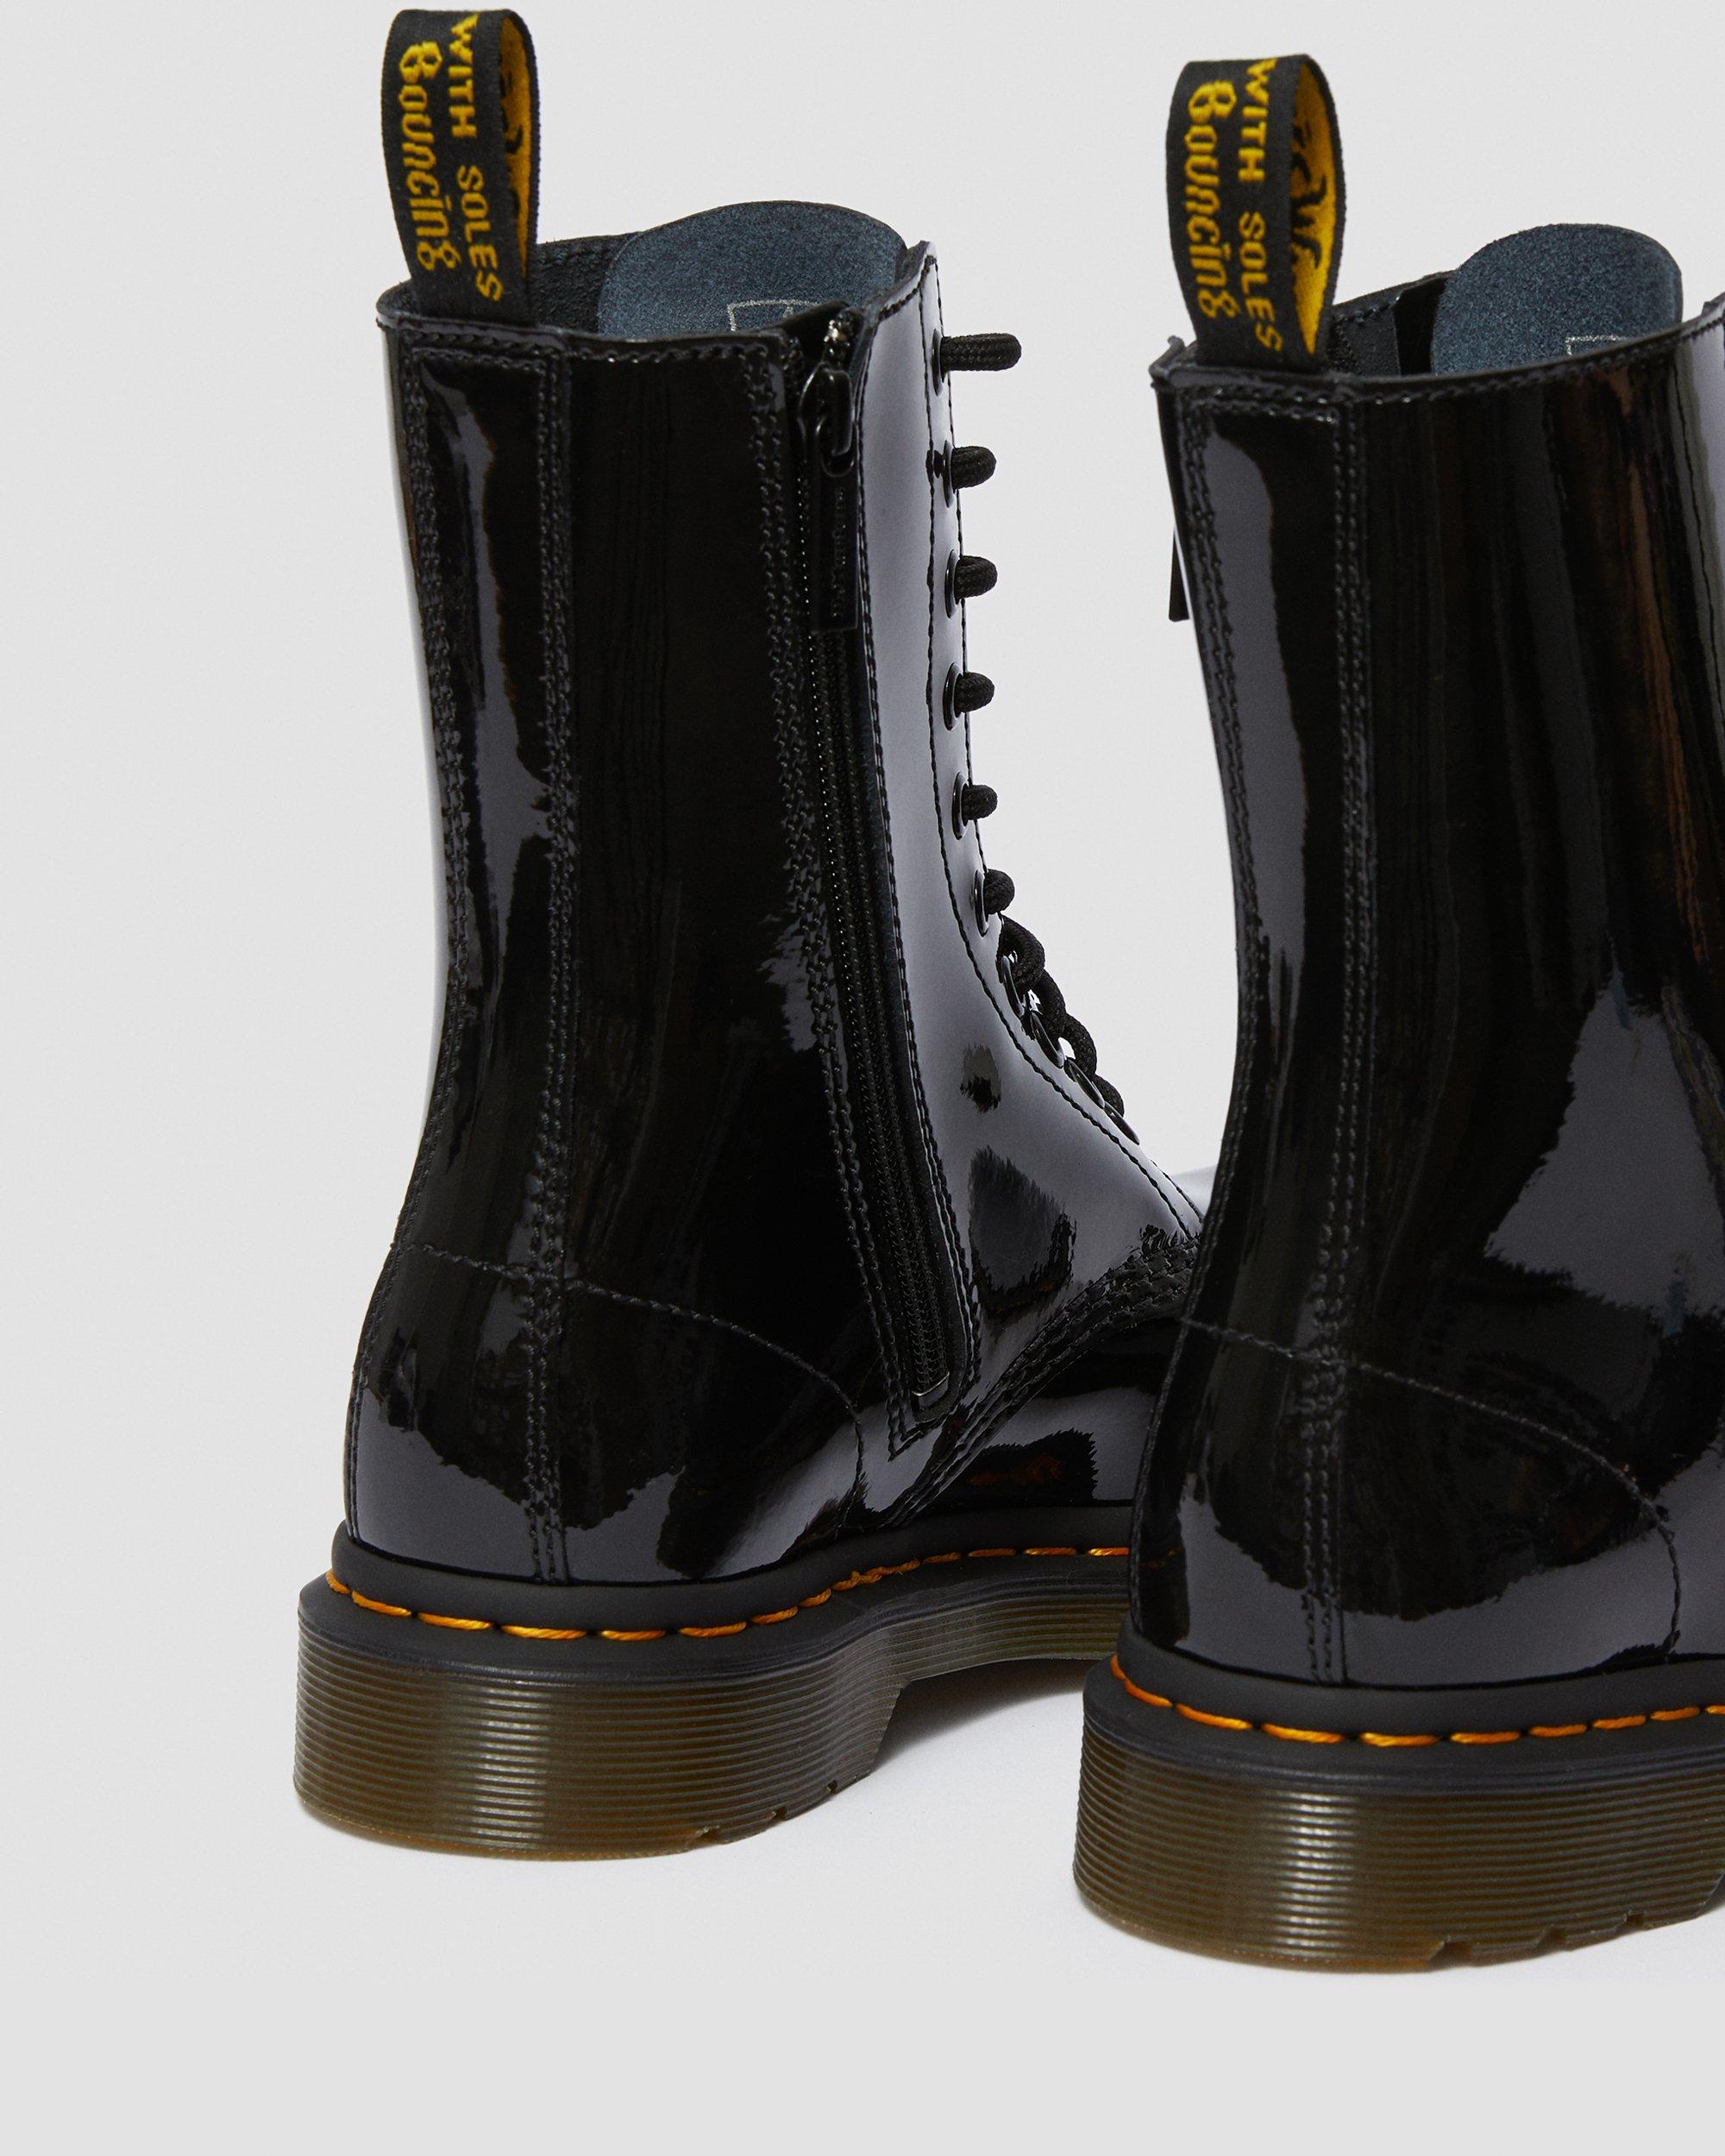 1490 Women's Patent Leather Mid Calf Boots, Black | Dr. Martens